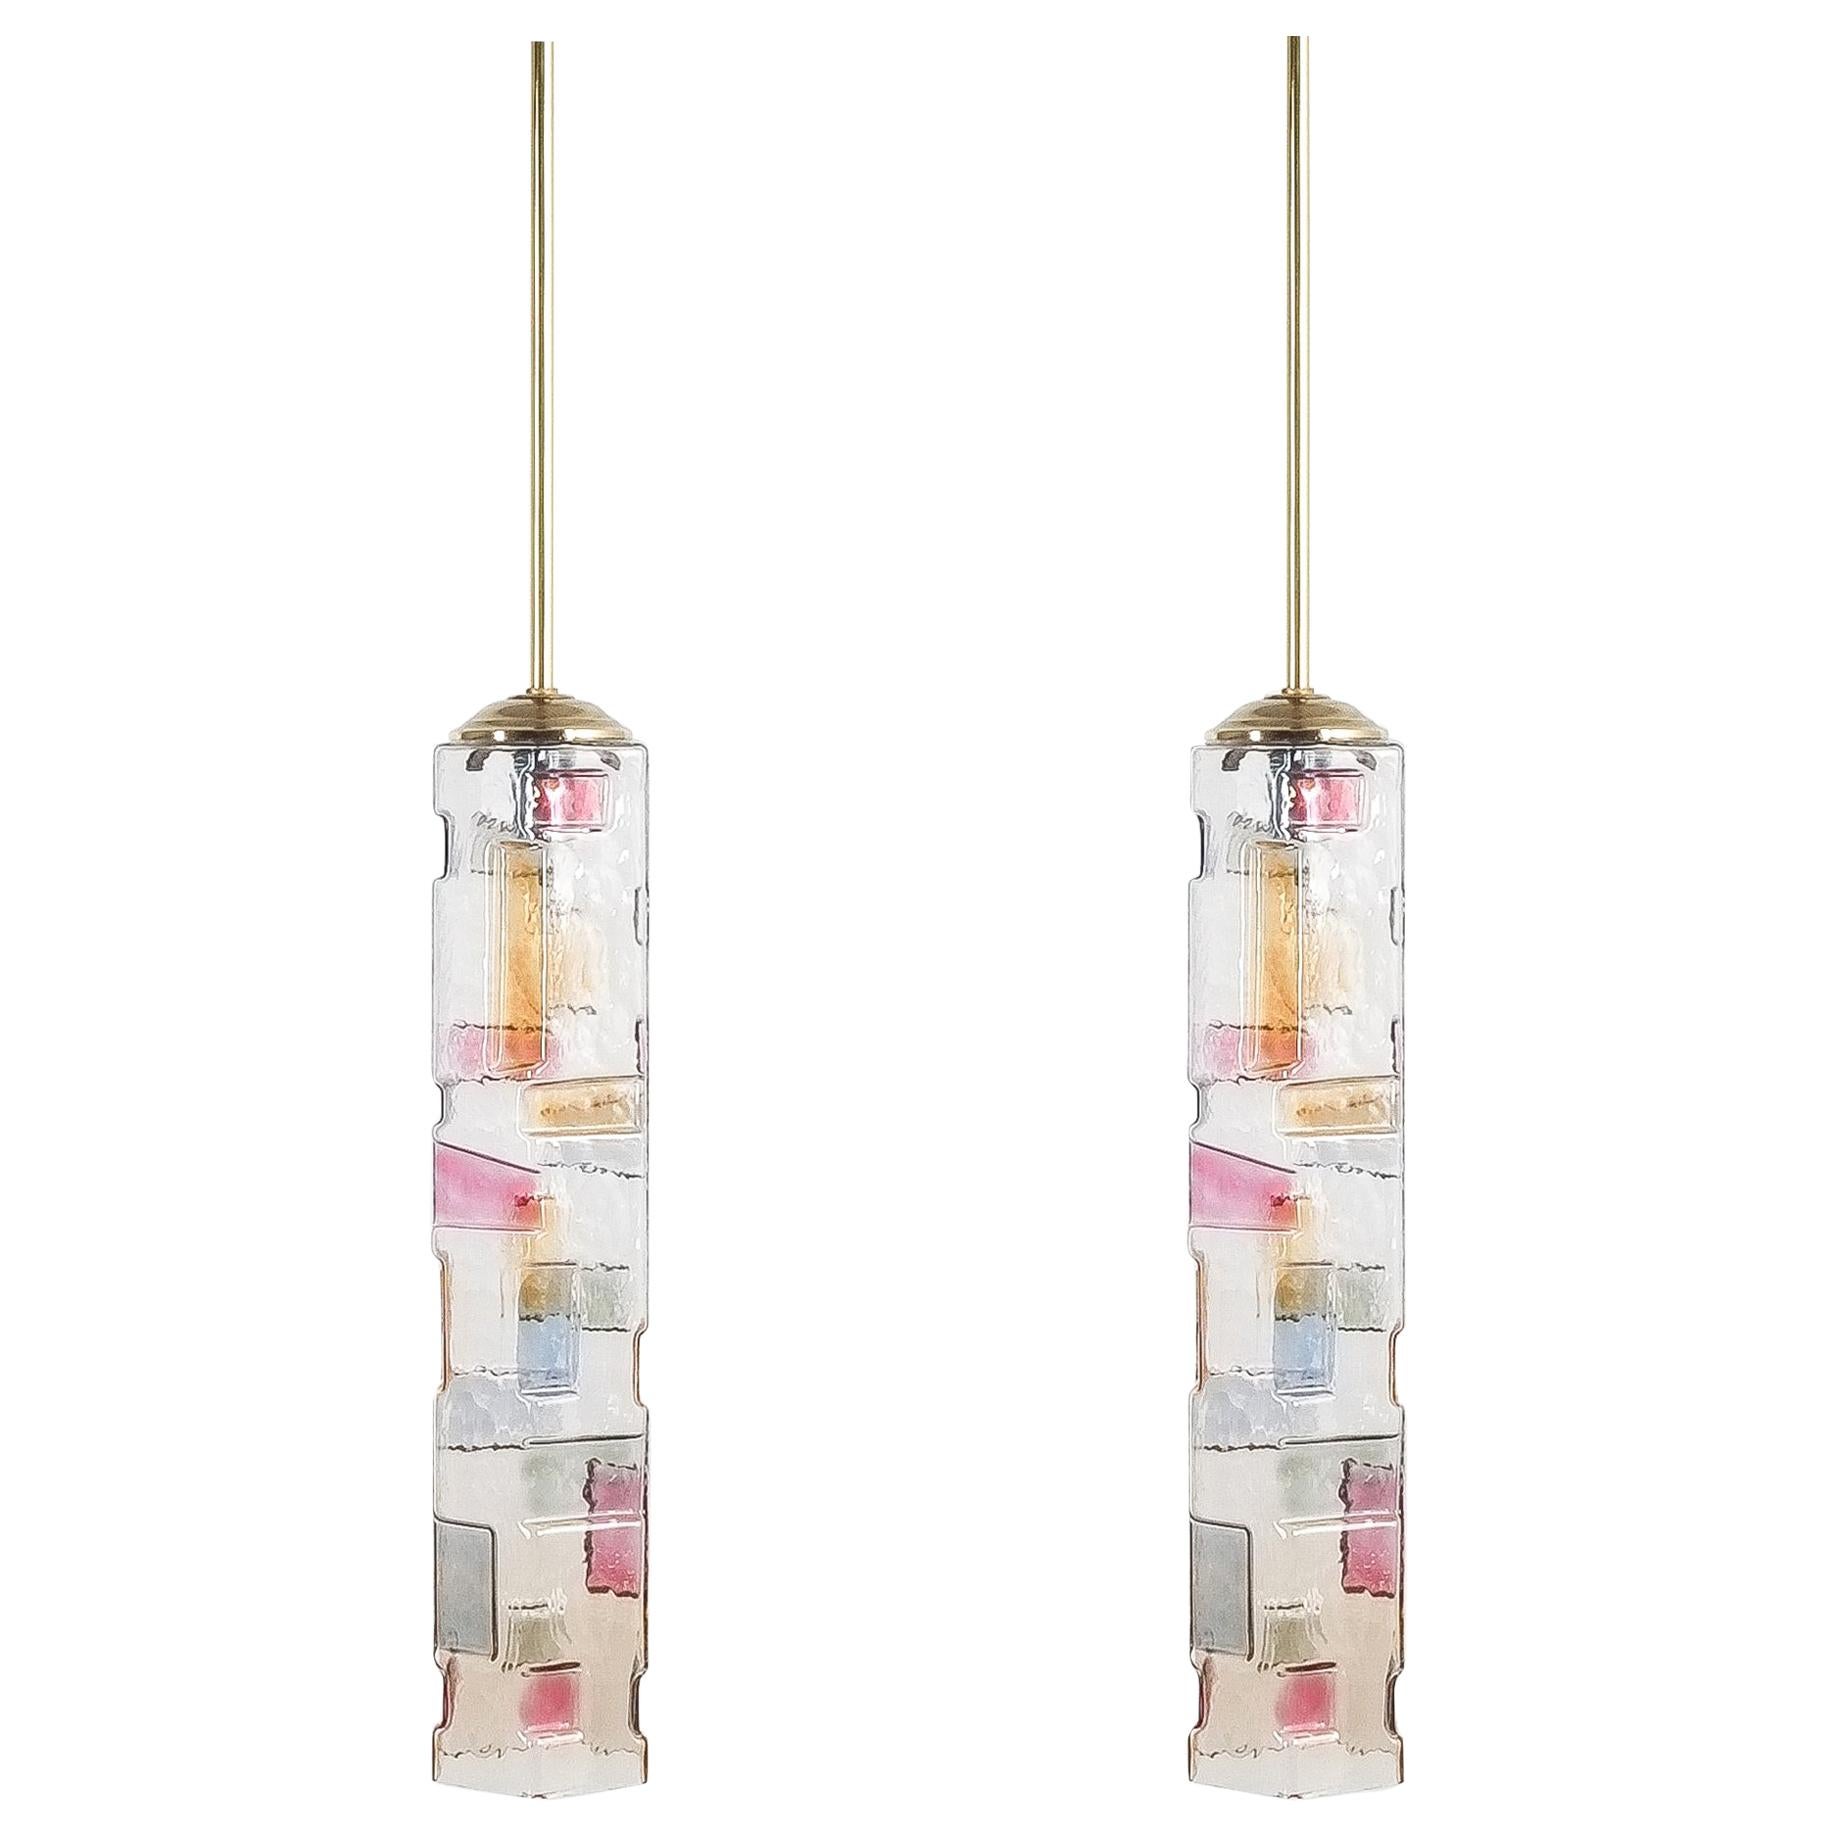 Pair of Colored Glass Pendant Lamps Style Poliarte, Italy, circa 1955